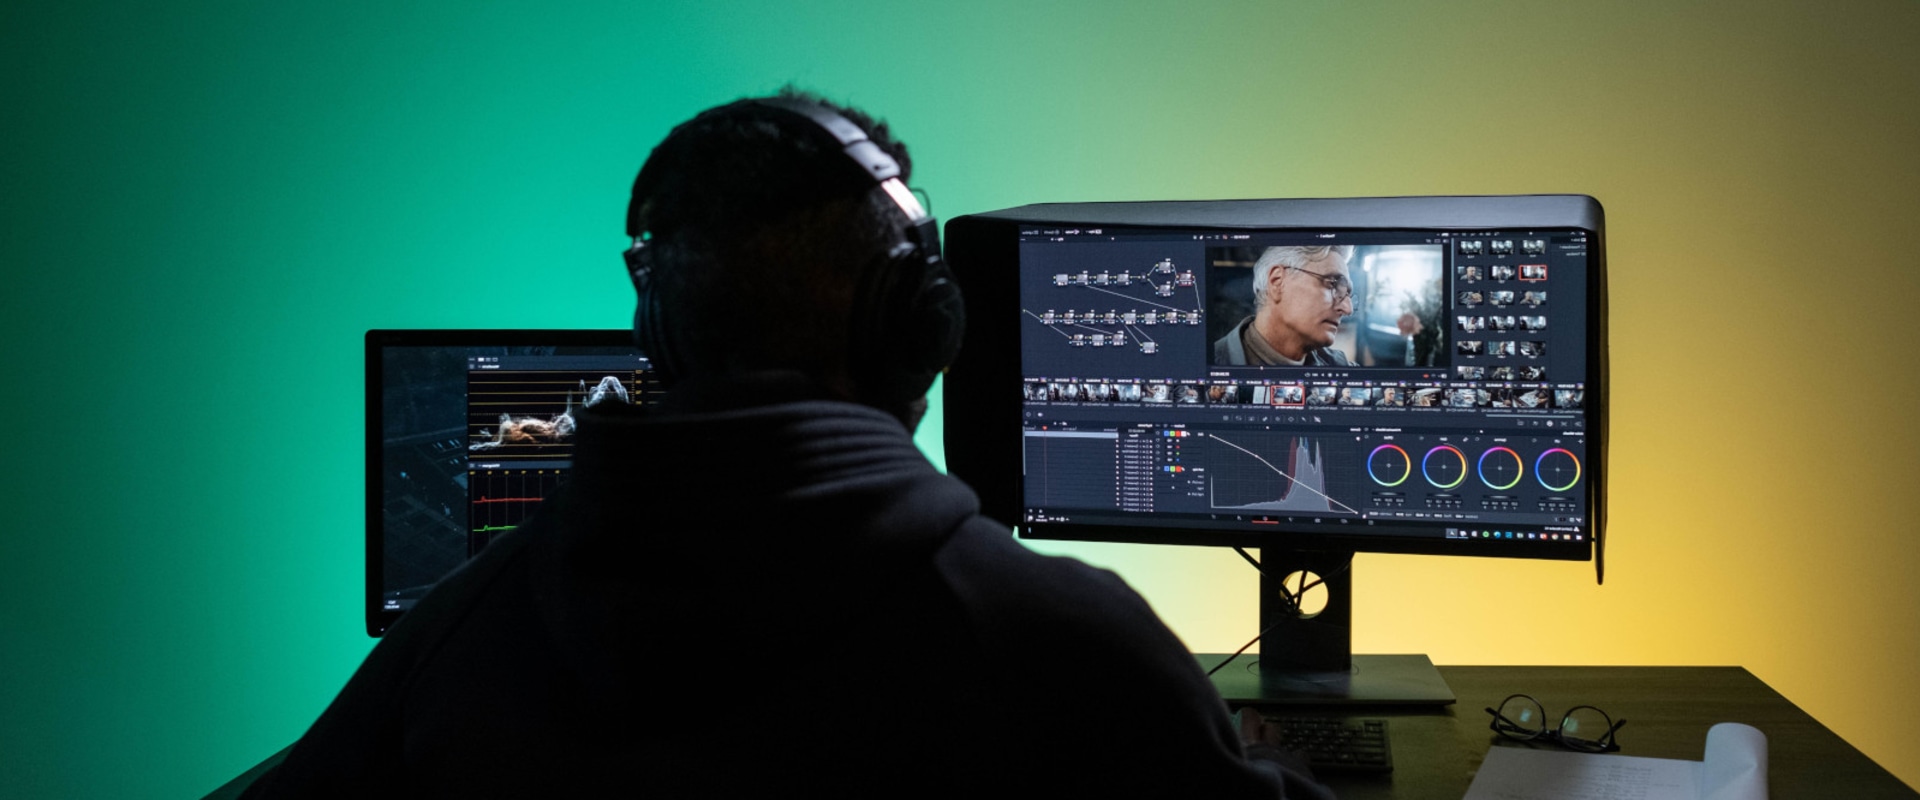 Reviews of the Best Film Editing Software